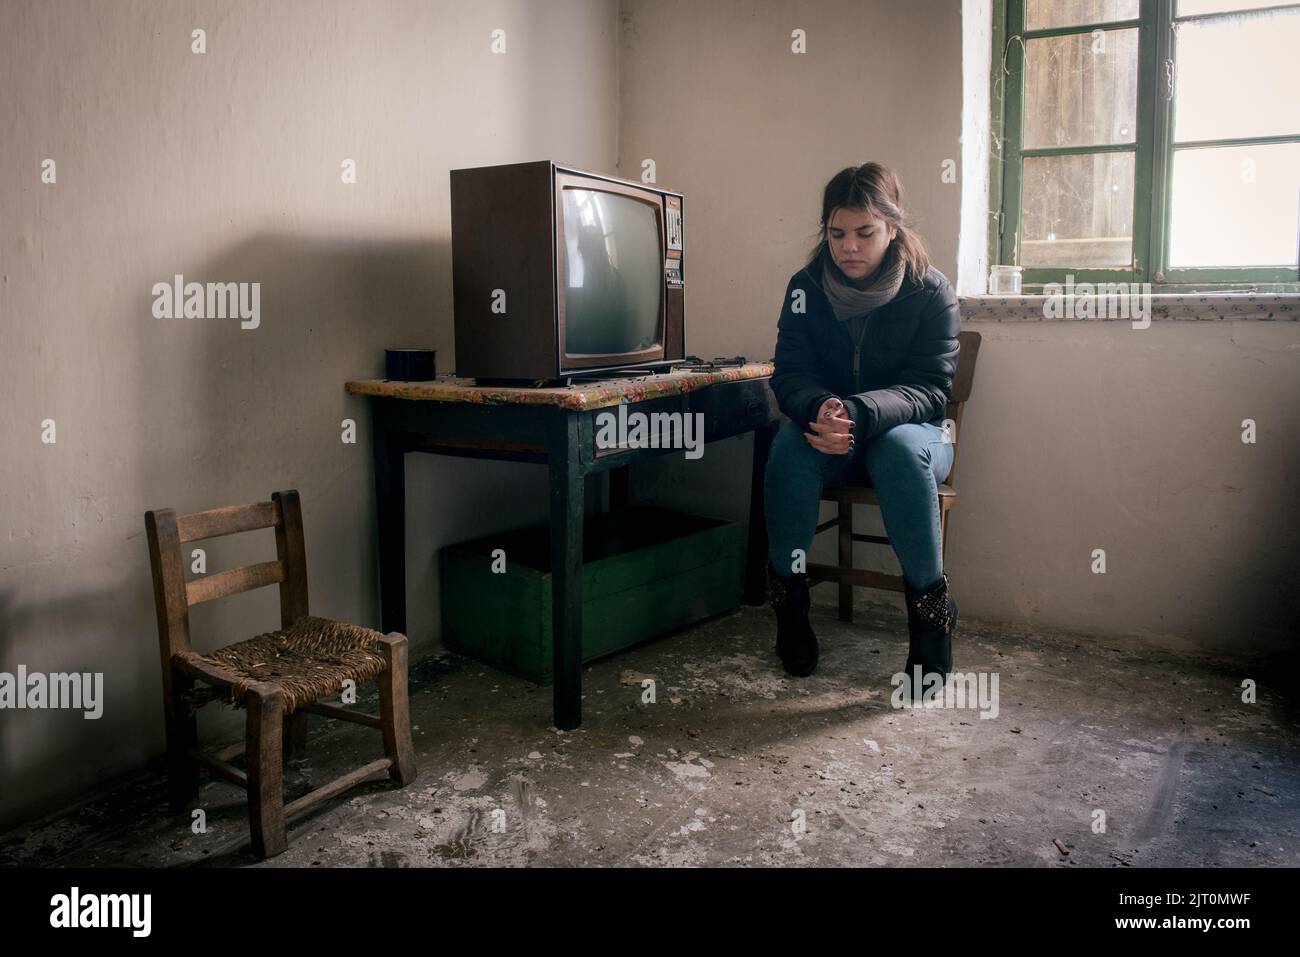 Young woman lonely in an abandoned ruined room with television. Loneliness concept Stock Photo